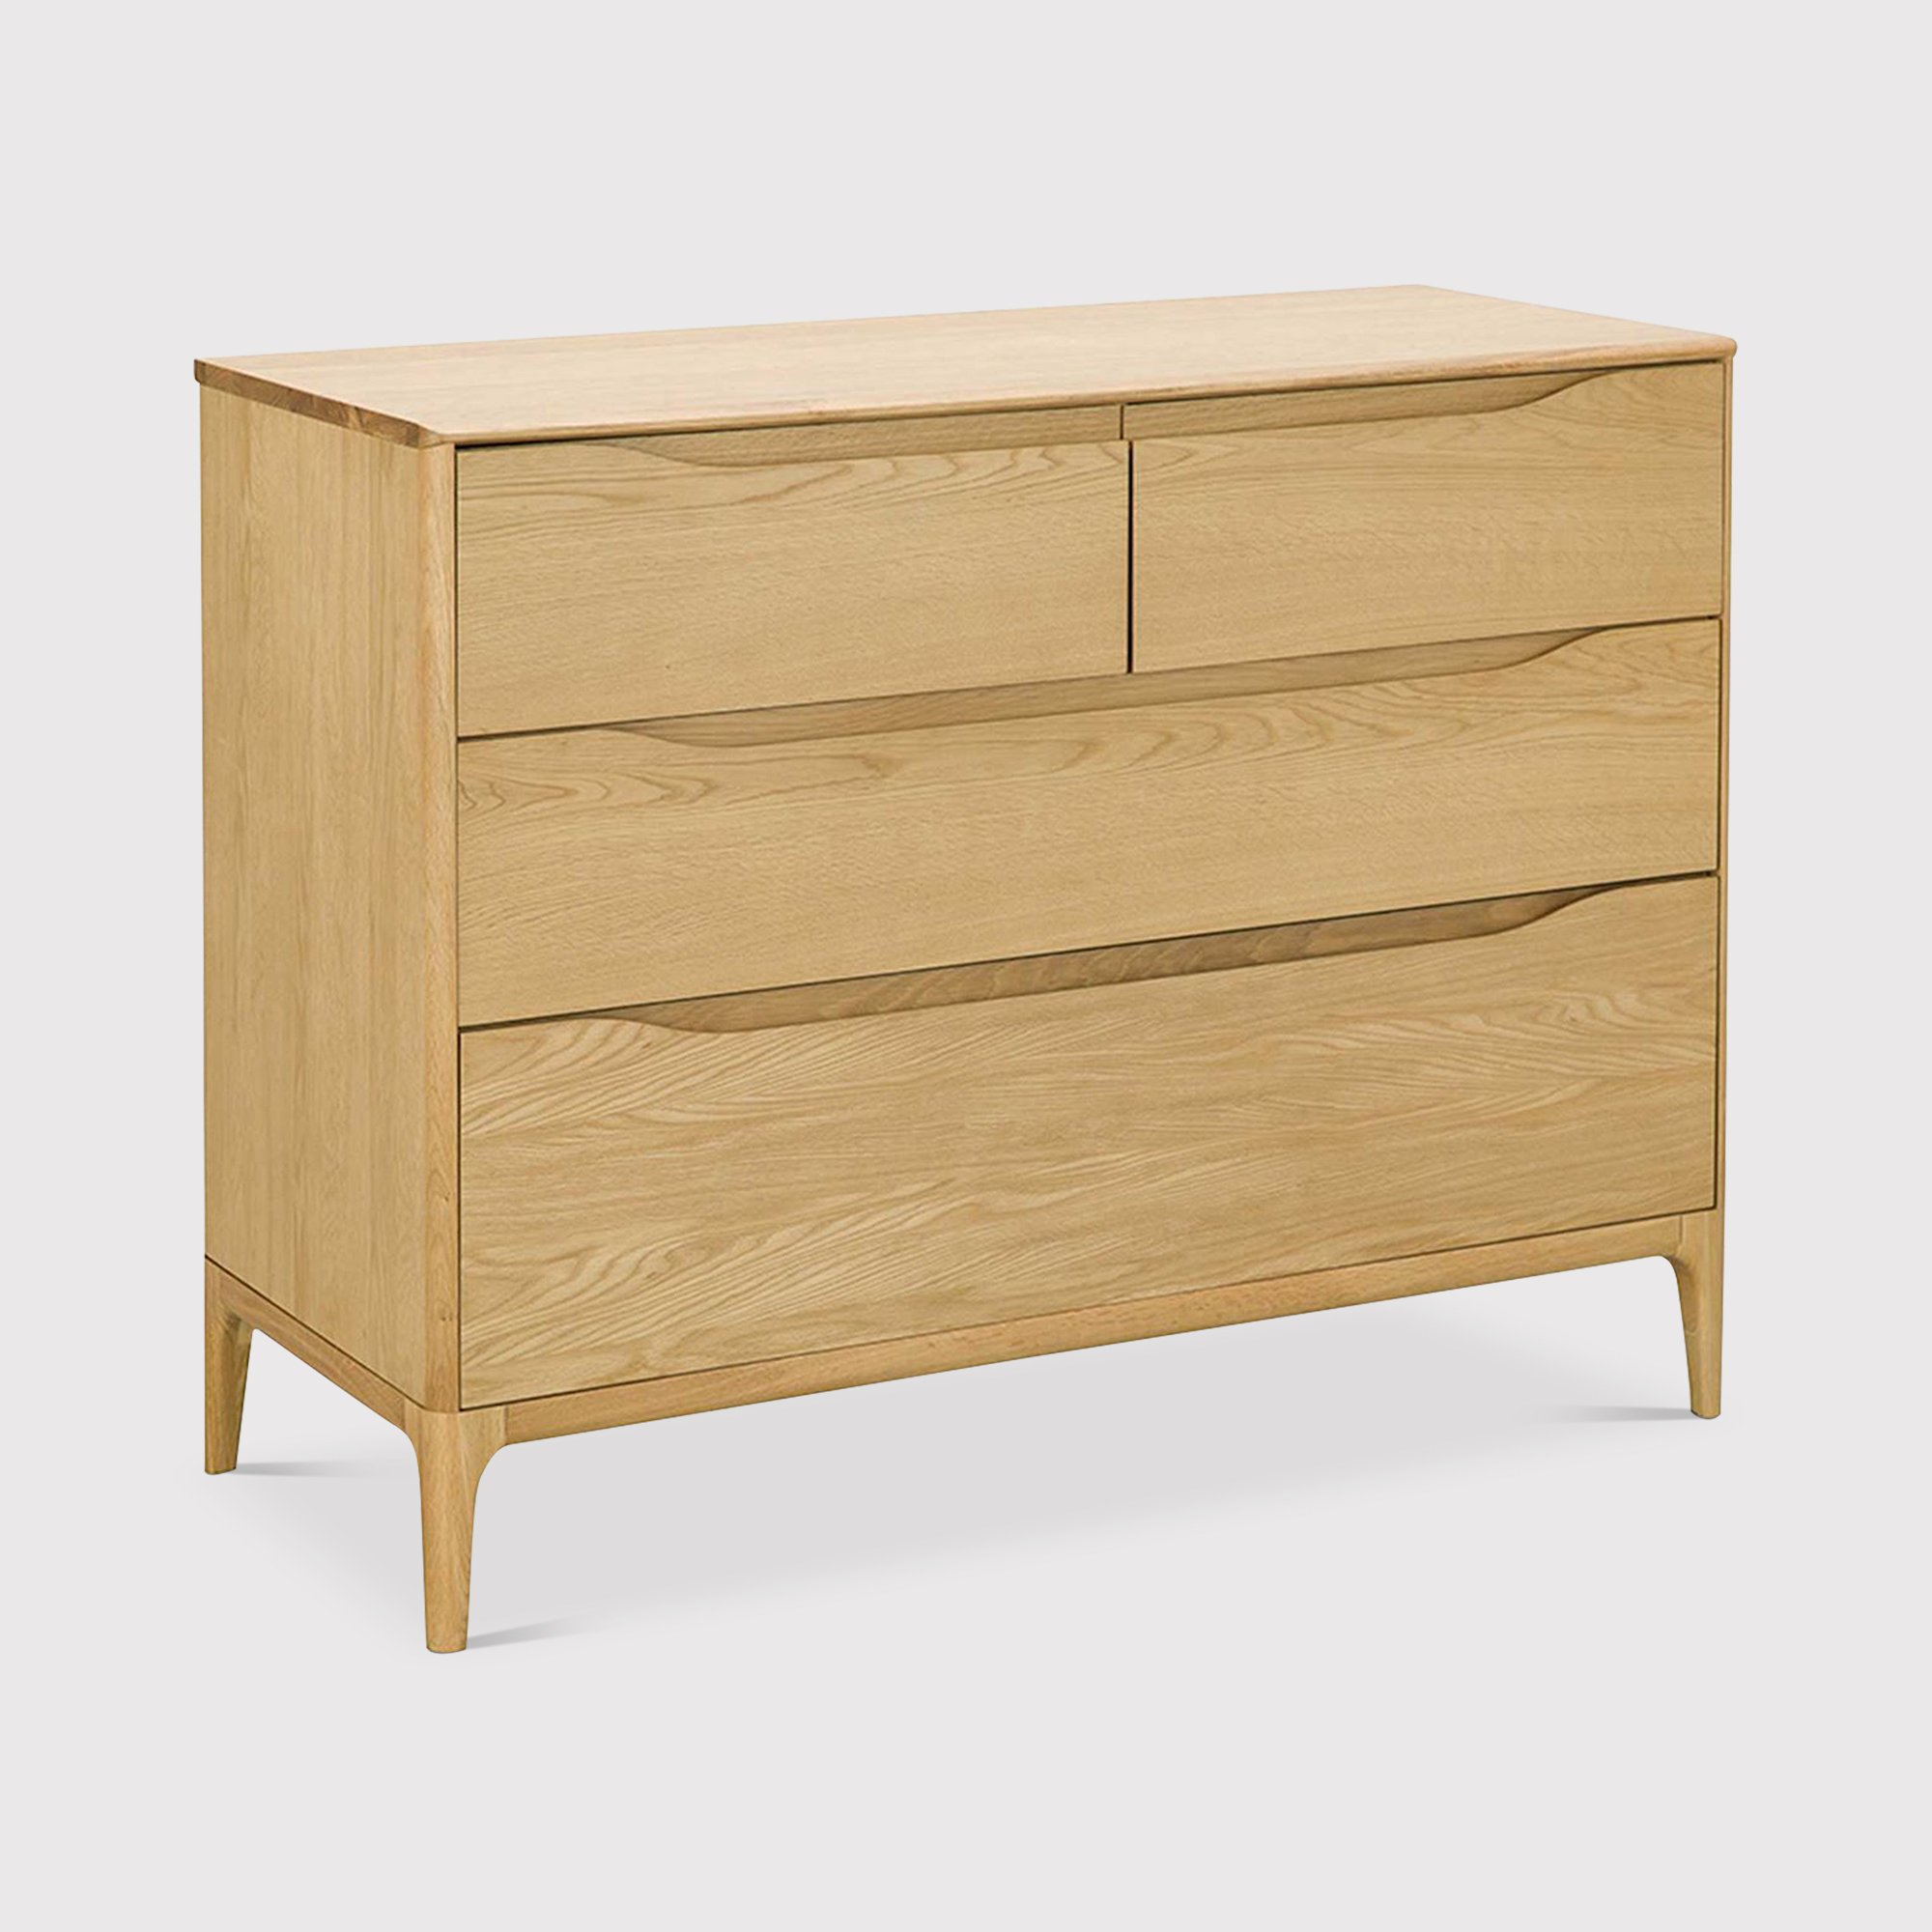 Ercol Rimini 4 Drawer Low Wide Chest, Neutral | Barker & Stonehouse